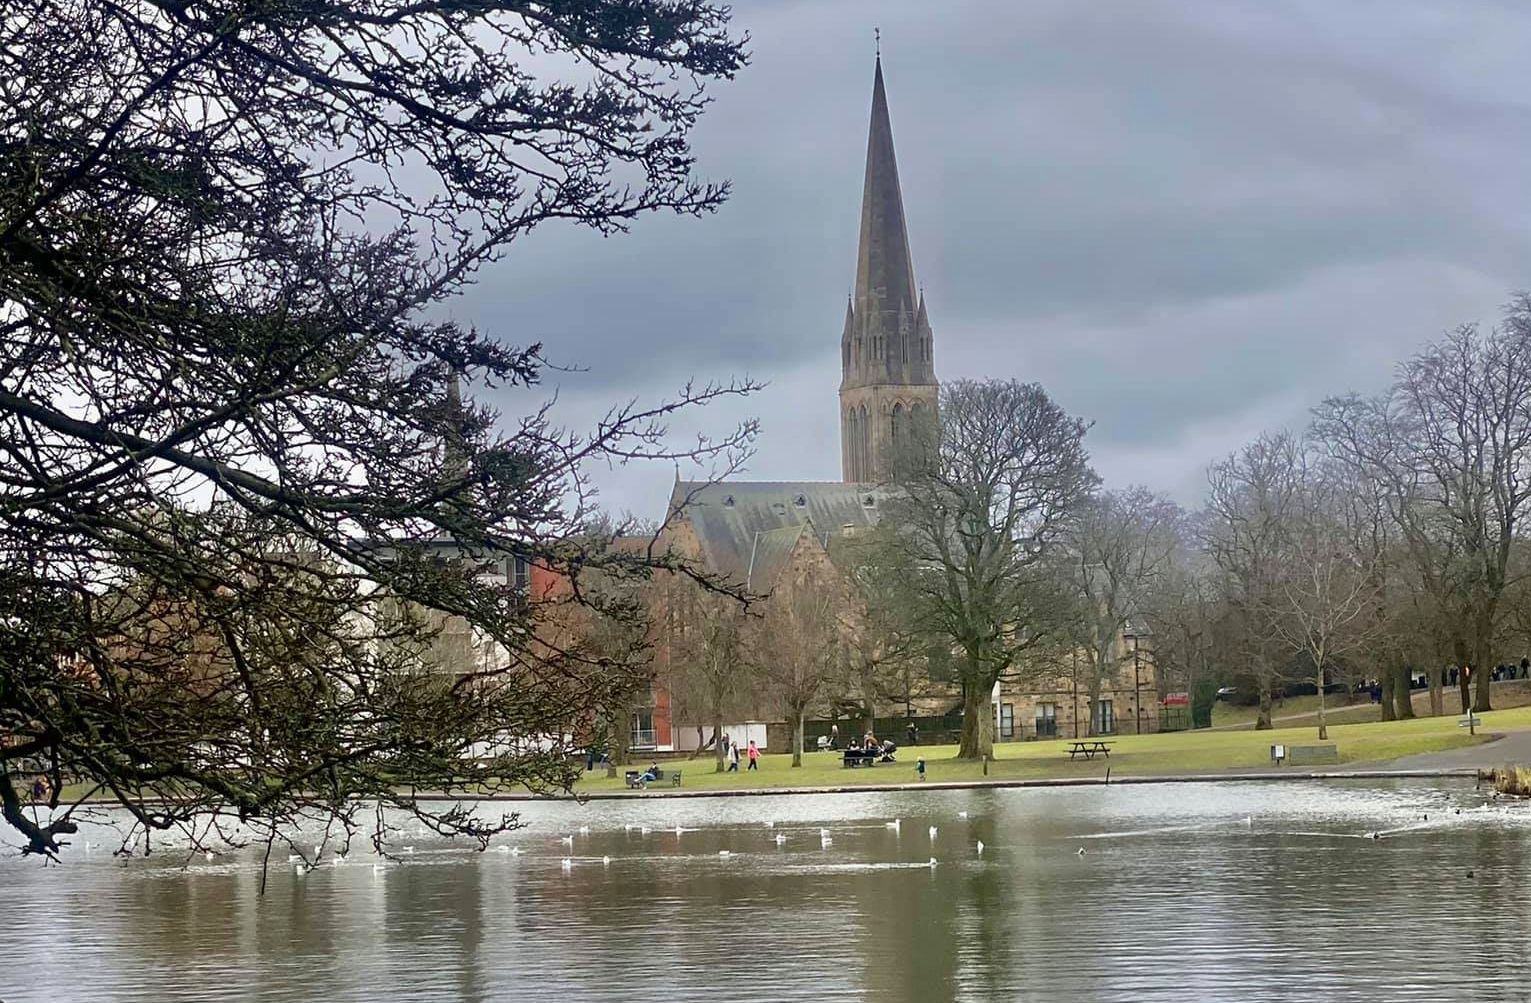 Boating pond and Queen's Park Baptist Church